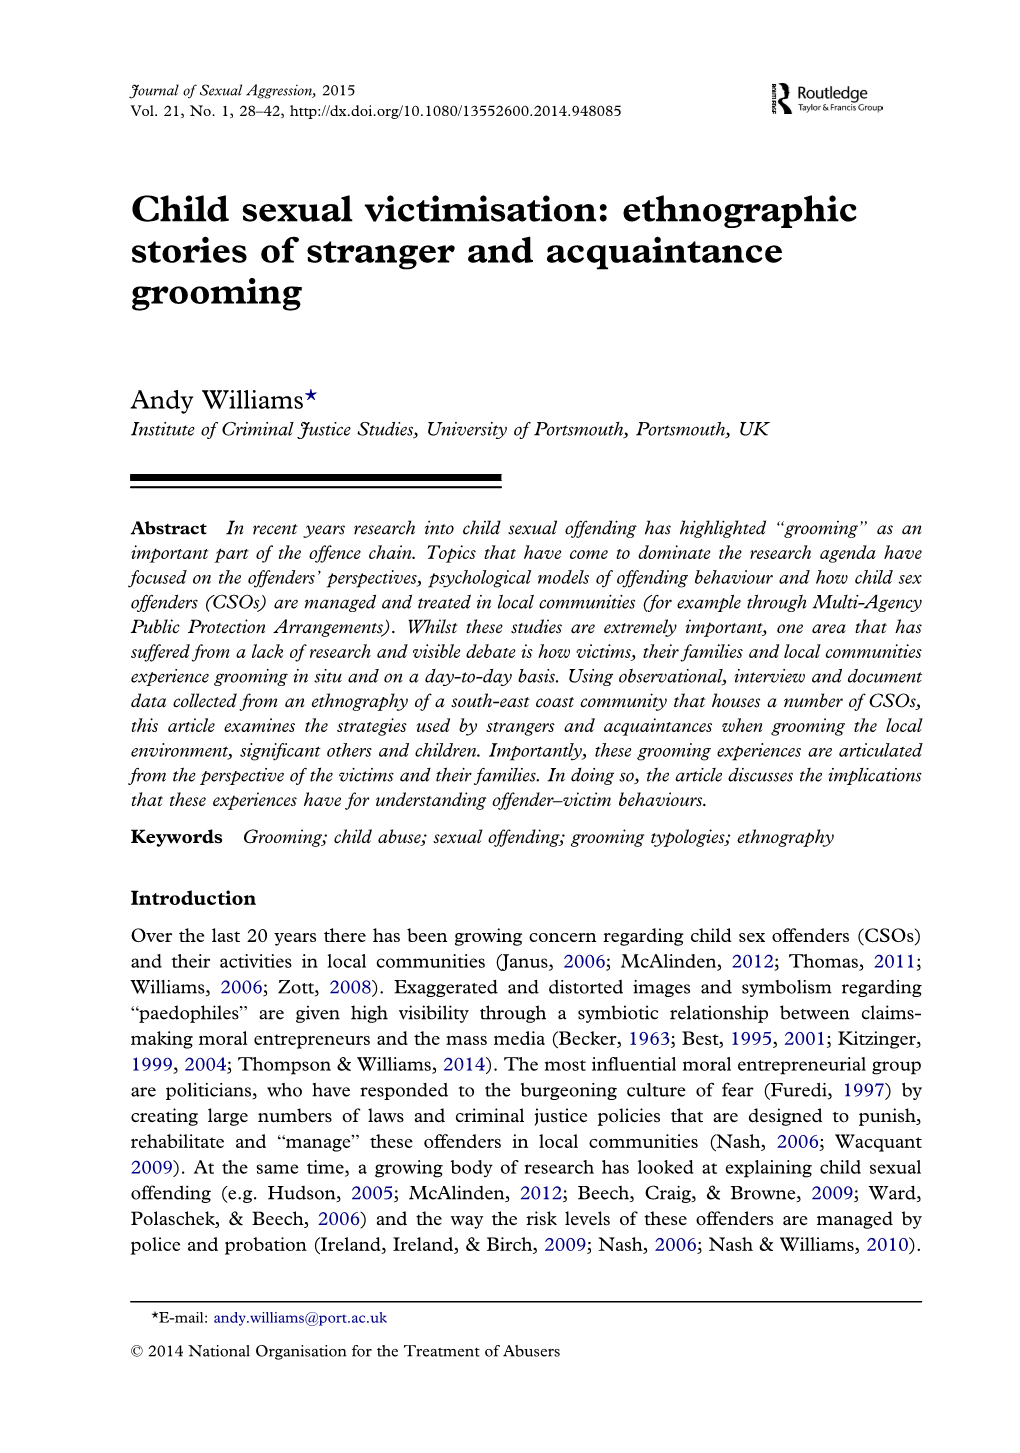 Ethnographic Stories of Stranger and Acquaintance Grooming